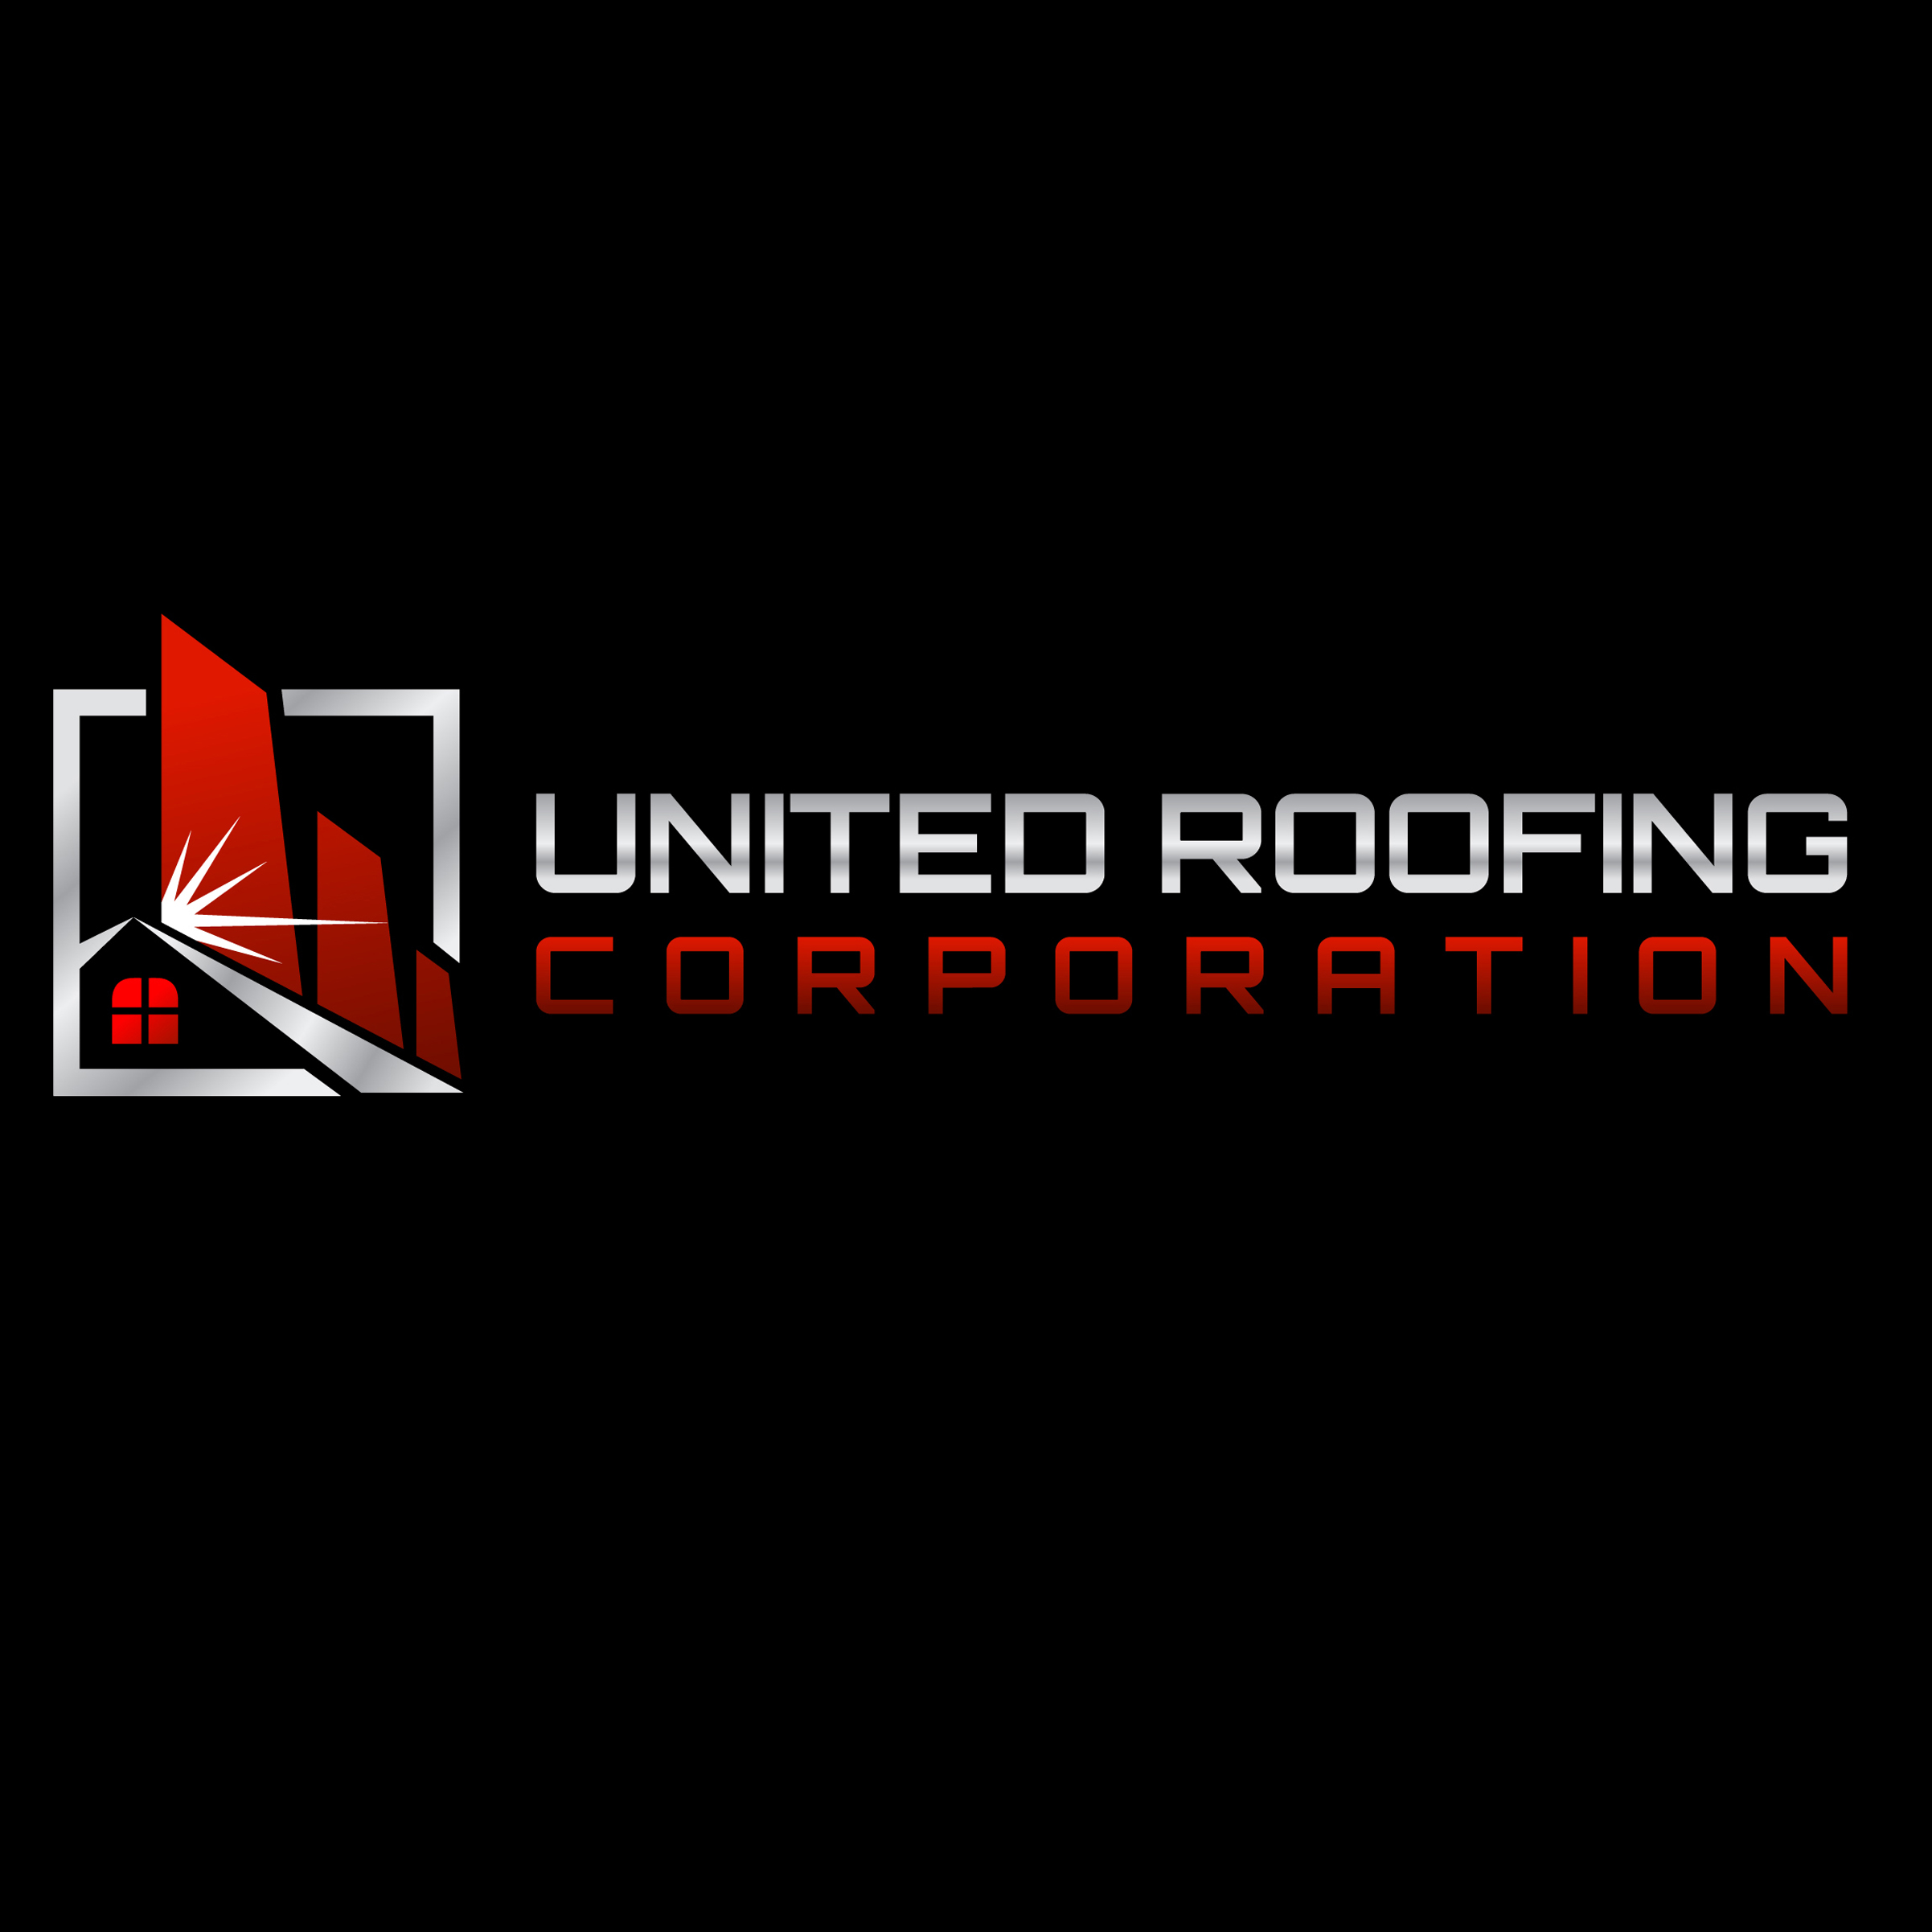 United Roofing Corporation Logo